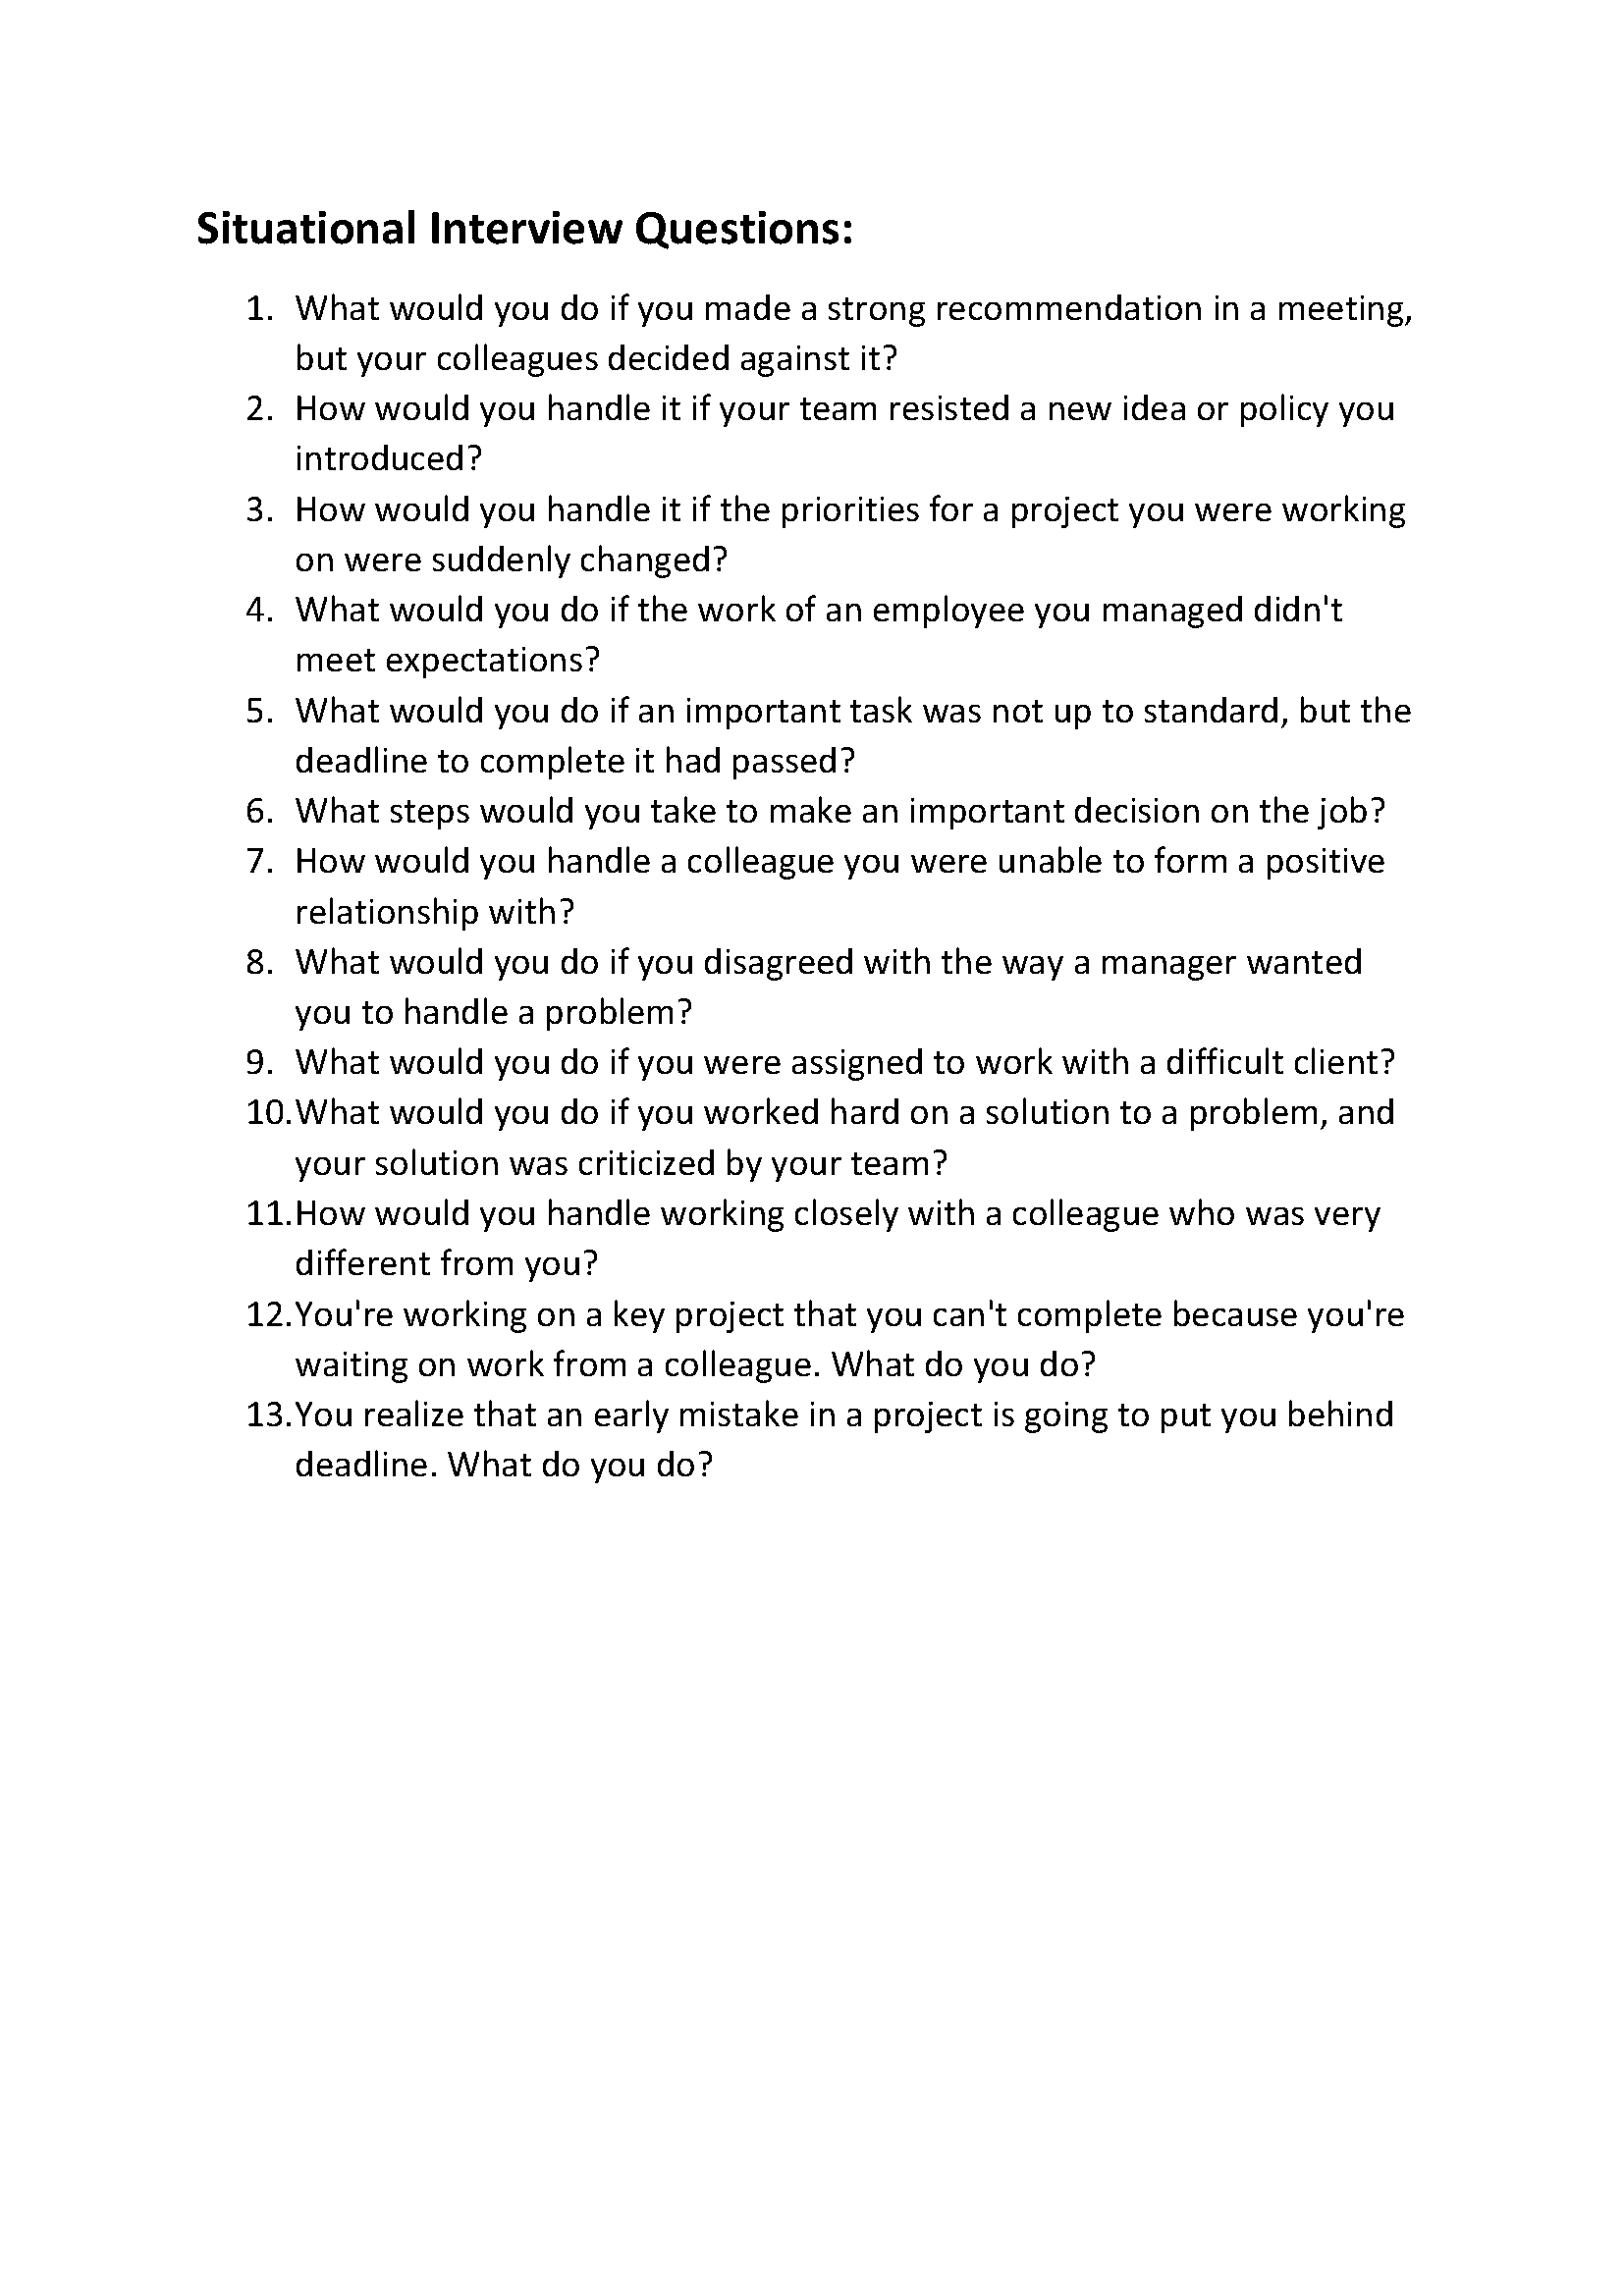 10 - Situational Interview Questions